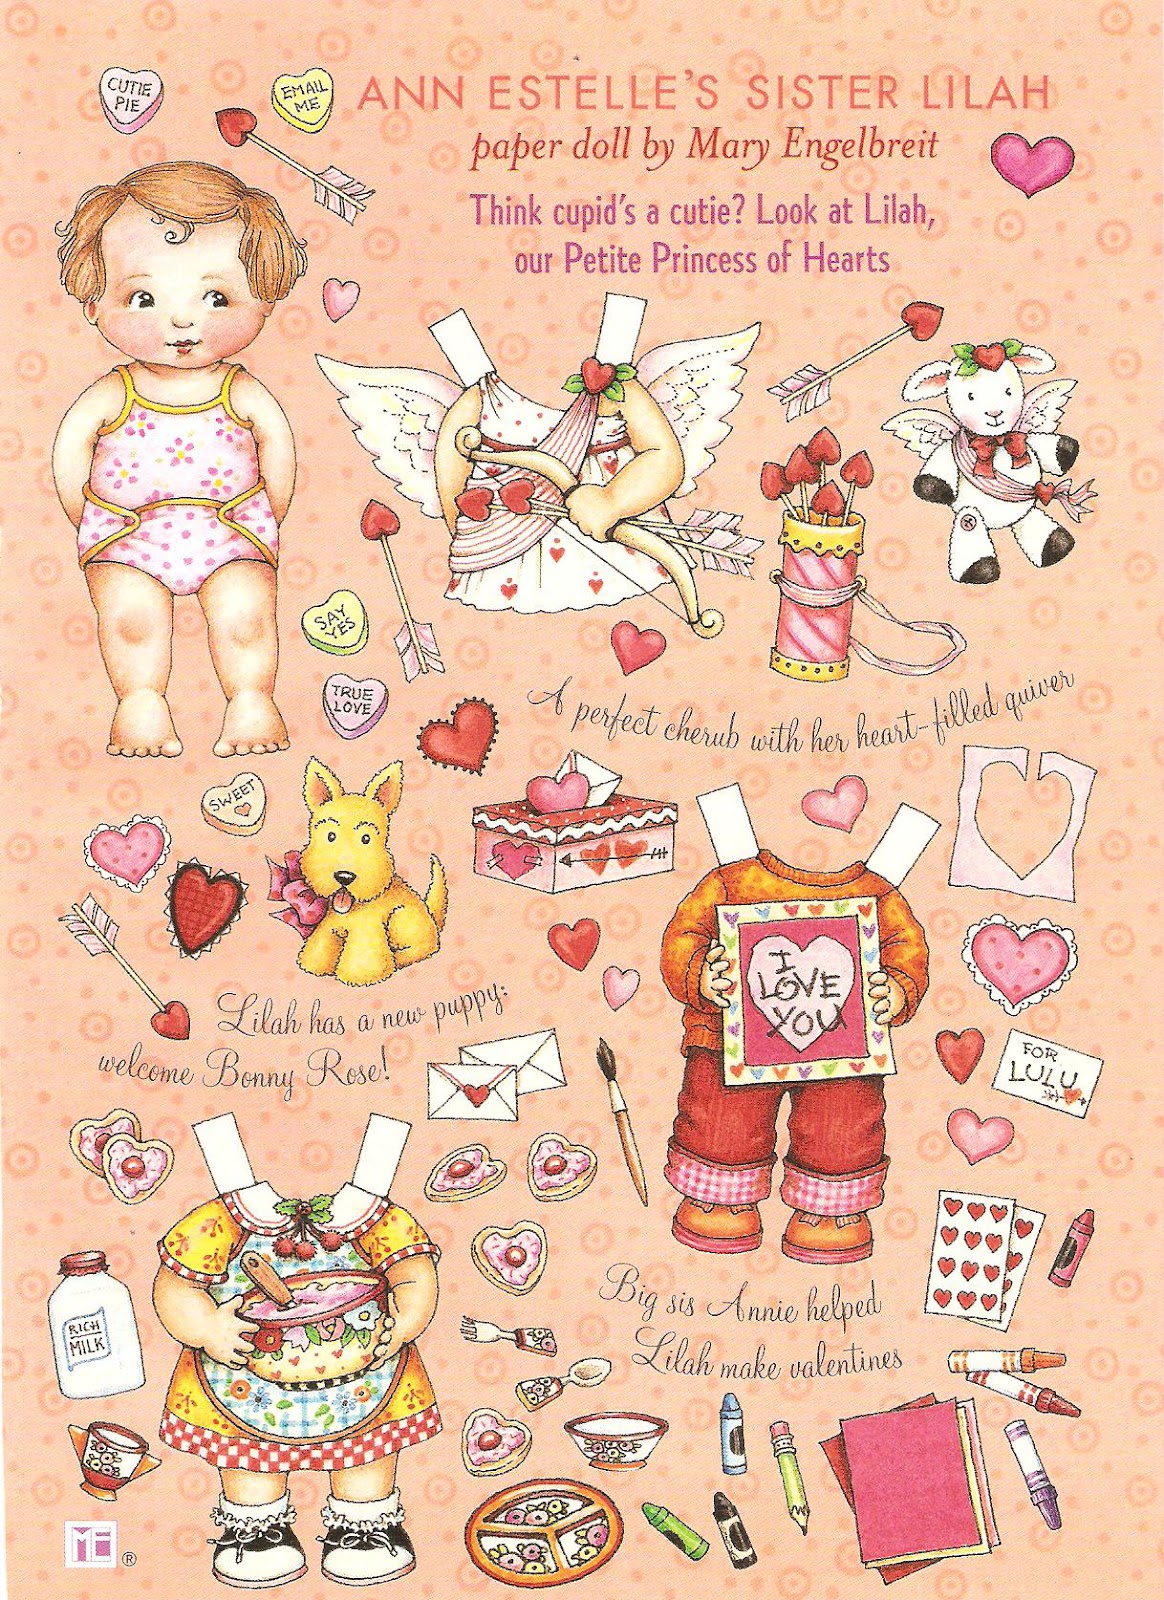 Here are a few pages of Lilah paper dolls she is Ann Estelle s little baby sister by artist Mary Engelbreit from her magazine Home panion